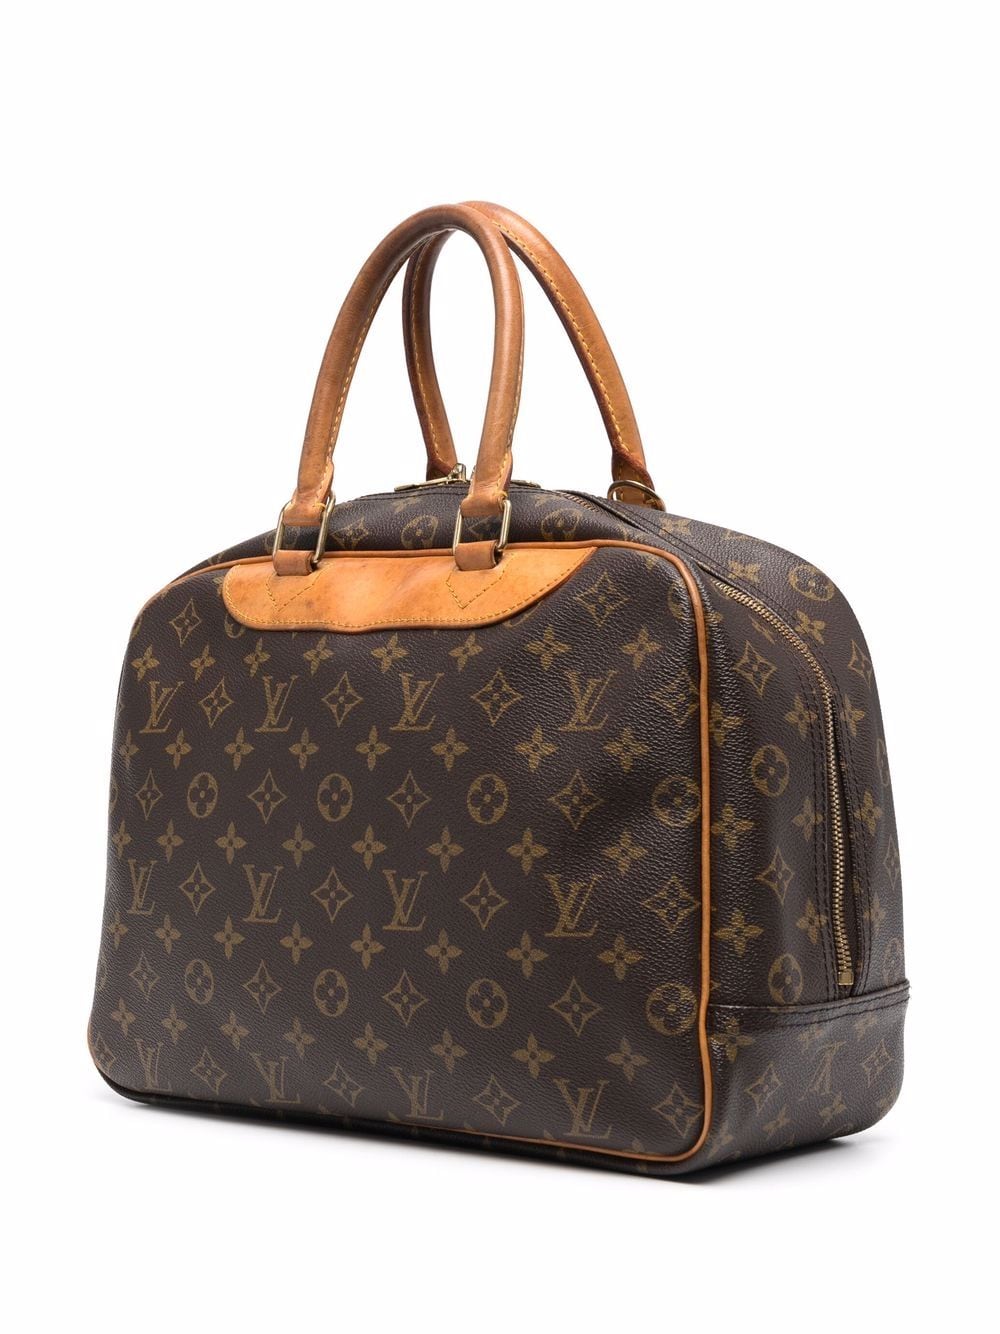 Louis Vuitton 1999 pre-owned Cabas Cruise Tote Bag - Farfetch